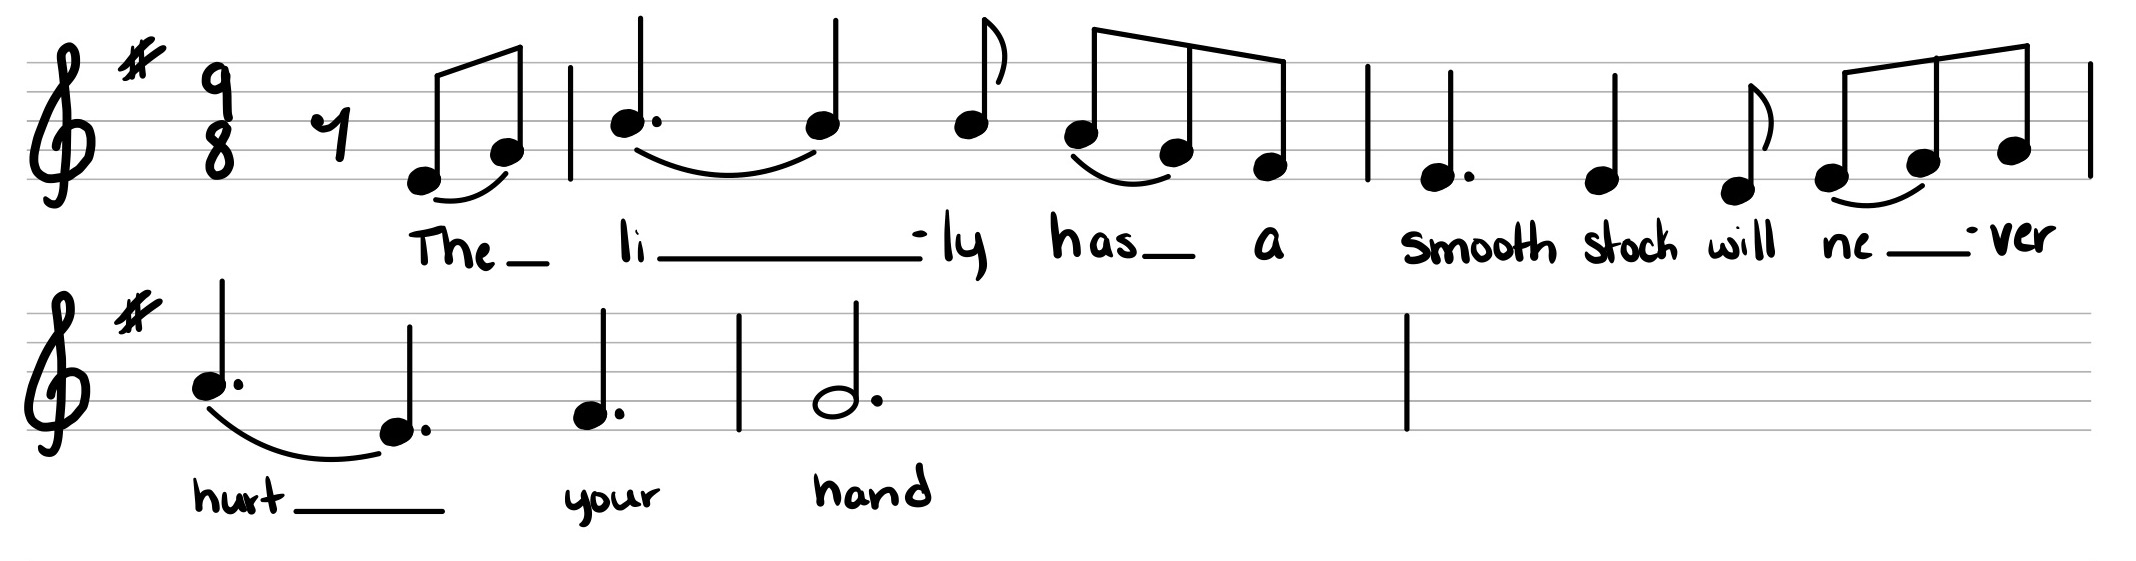 Traditional staff notation on a one-line percussion staff for the rhythms of 0:18–0:31 of the song “The Rose.” The notation is in treble clef, in E minor, and “nine-eight” meter. The lyrics are written below the noteheads.